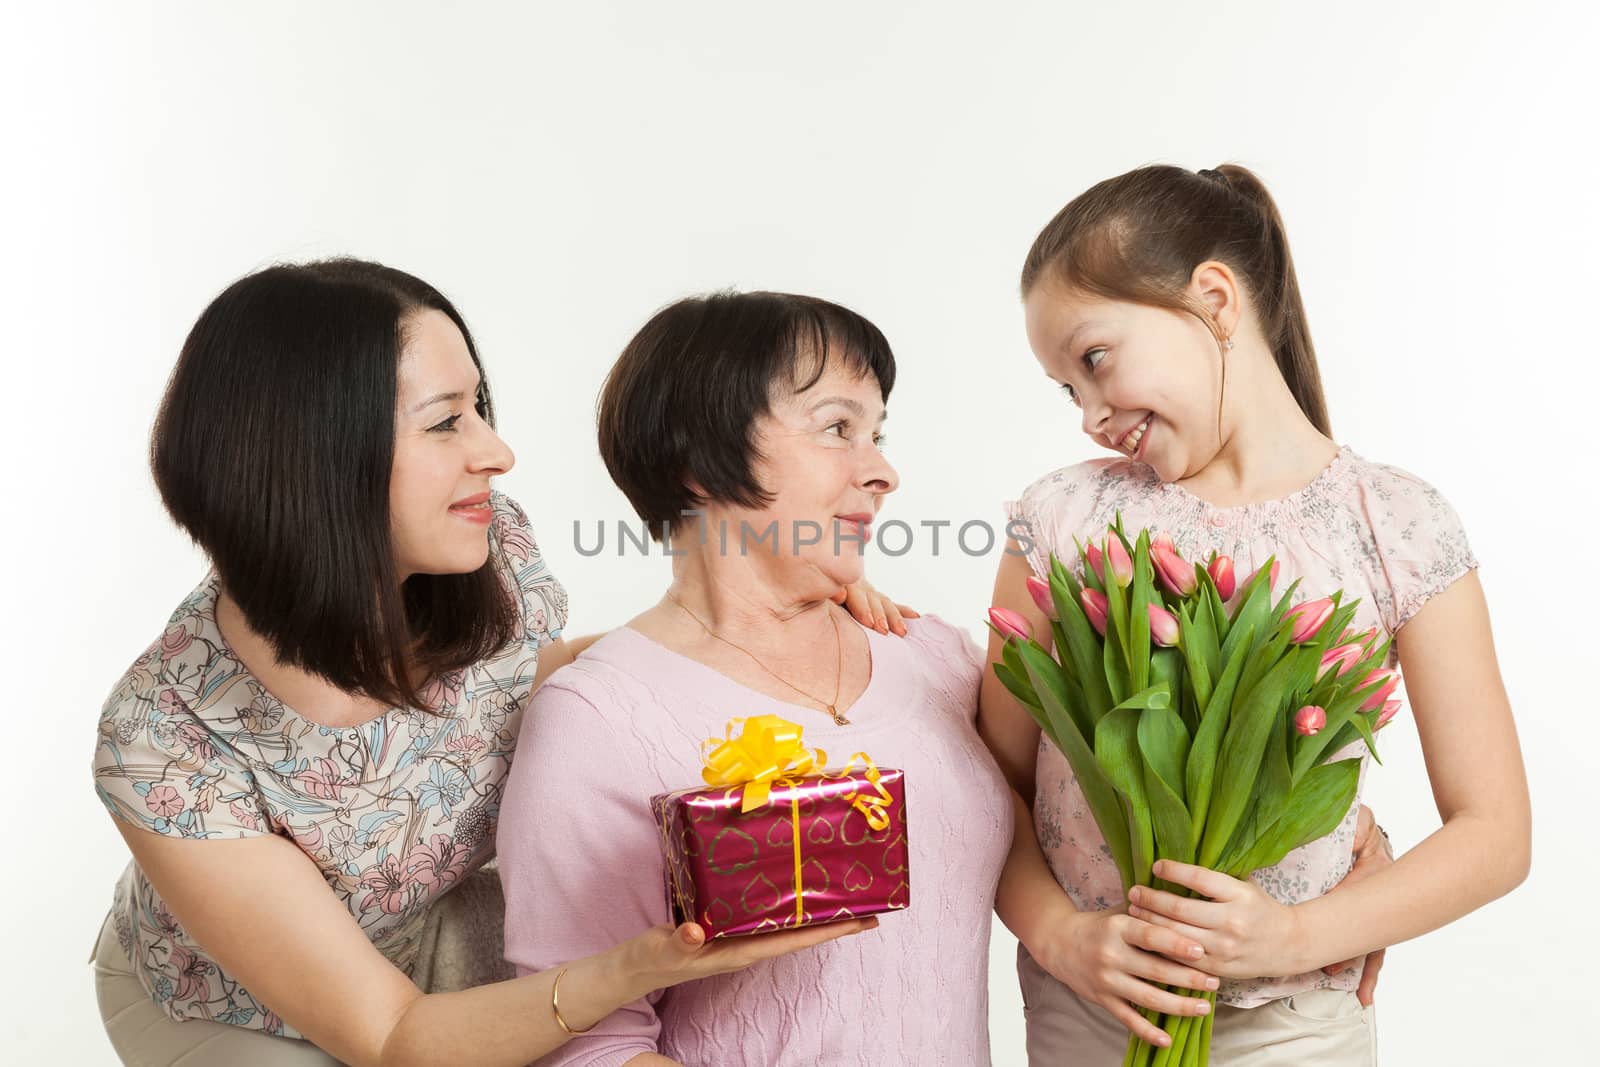 the daughter and the granddaughter give a bouquet of tulips to the grandmother